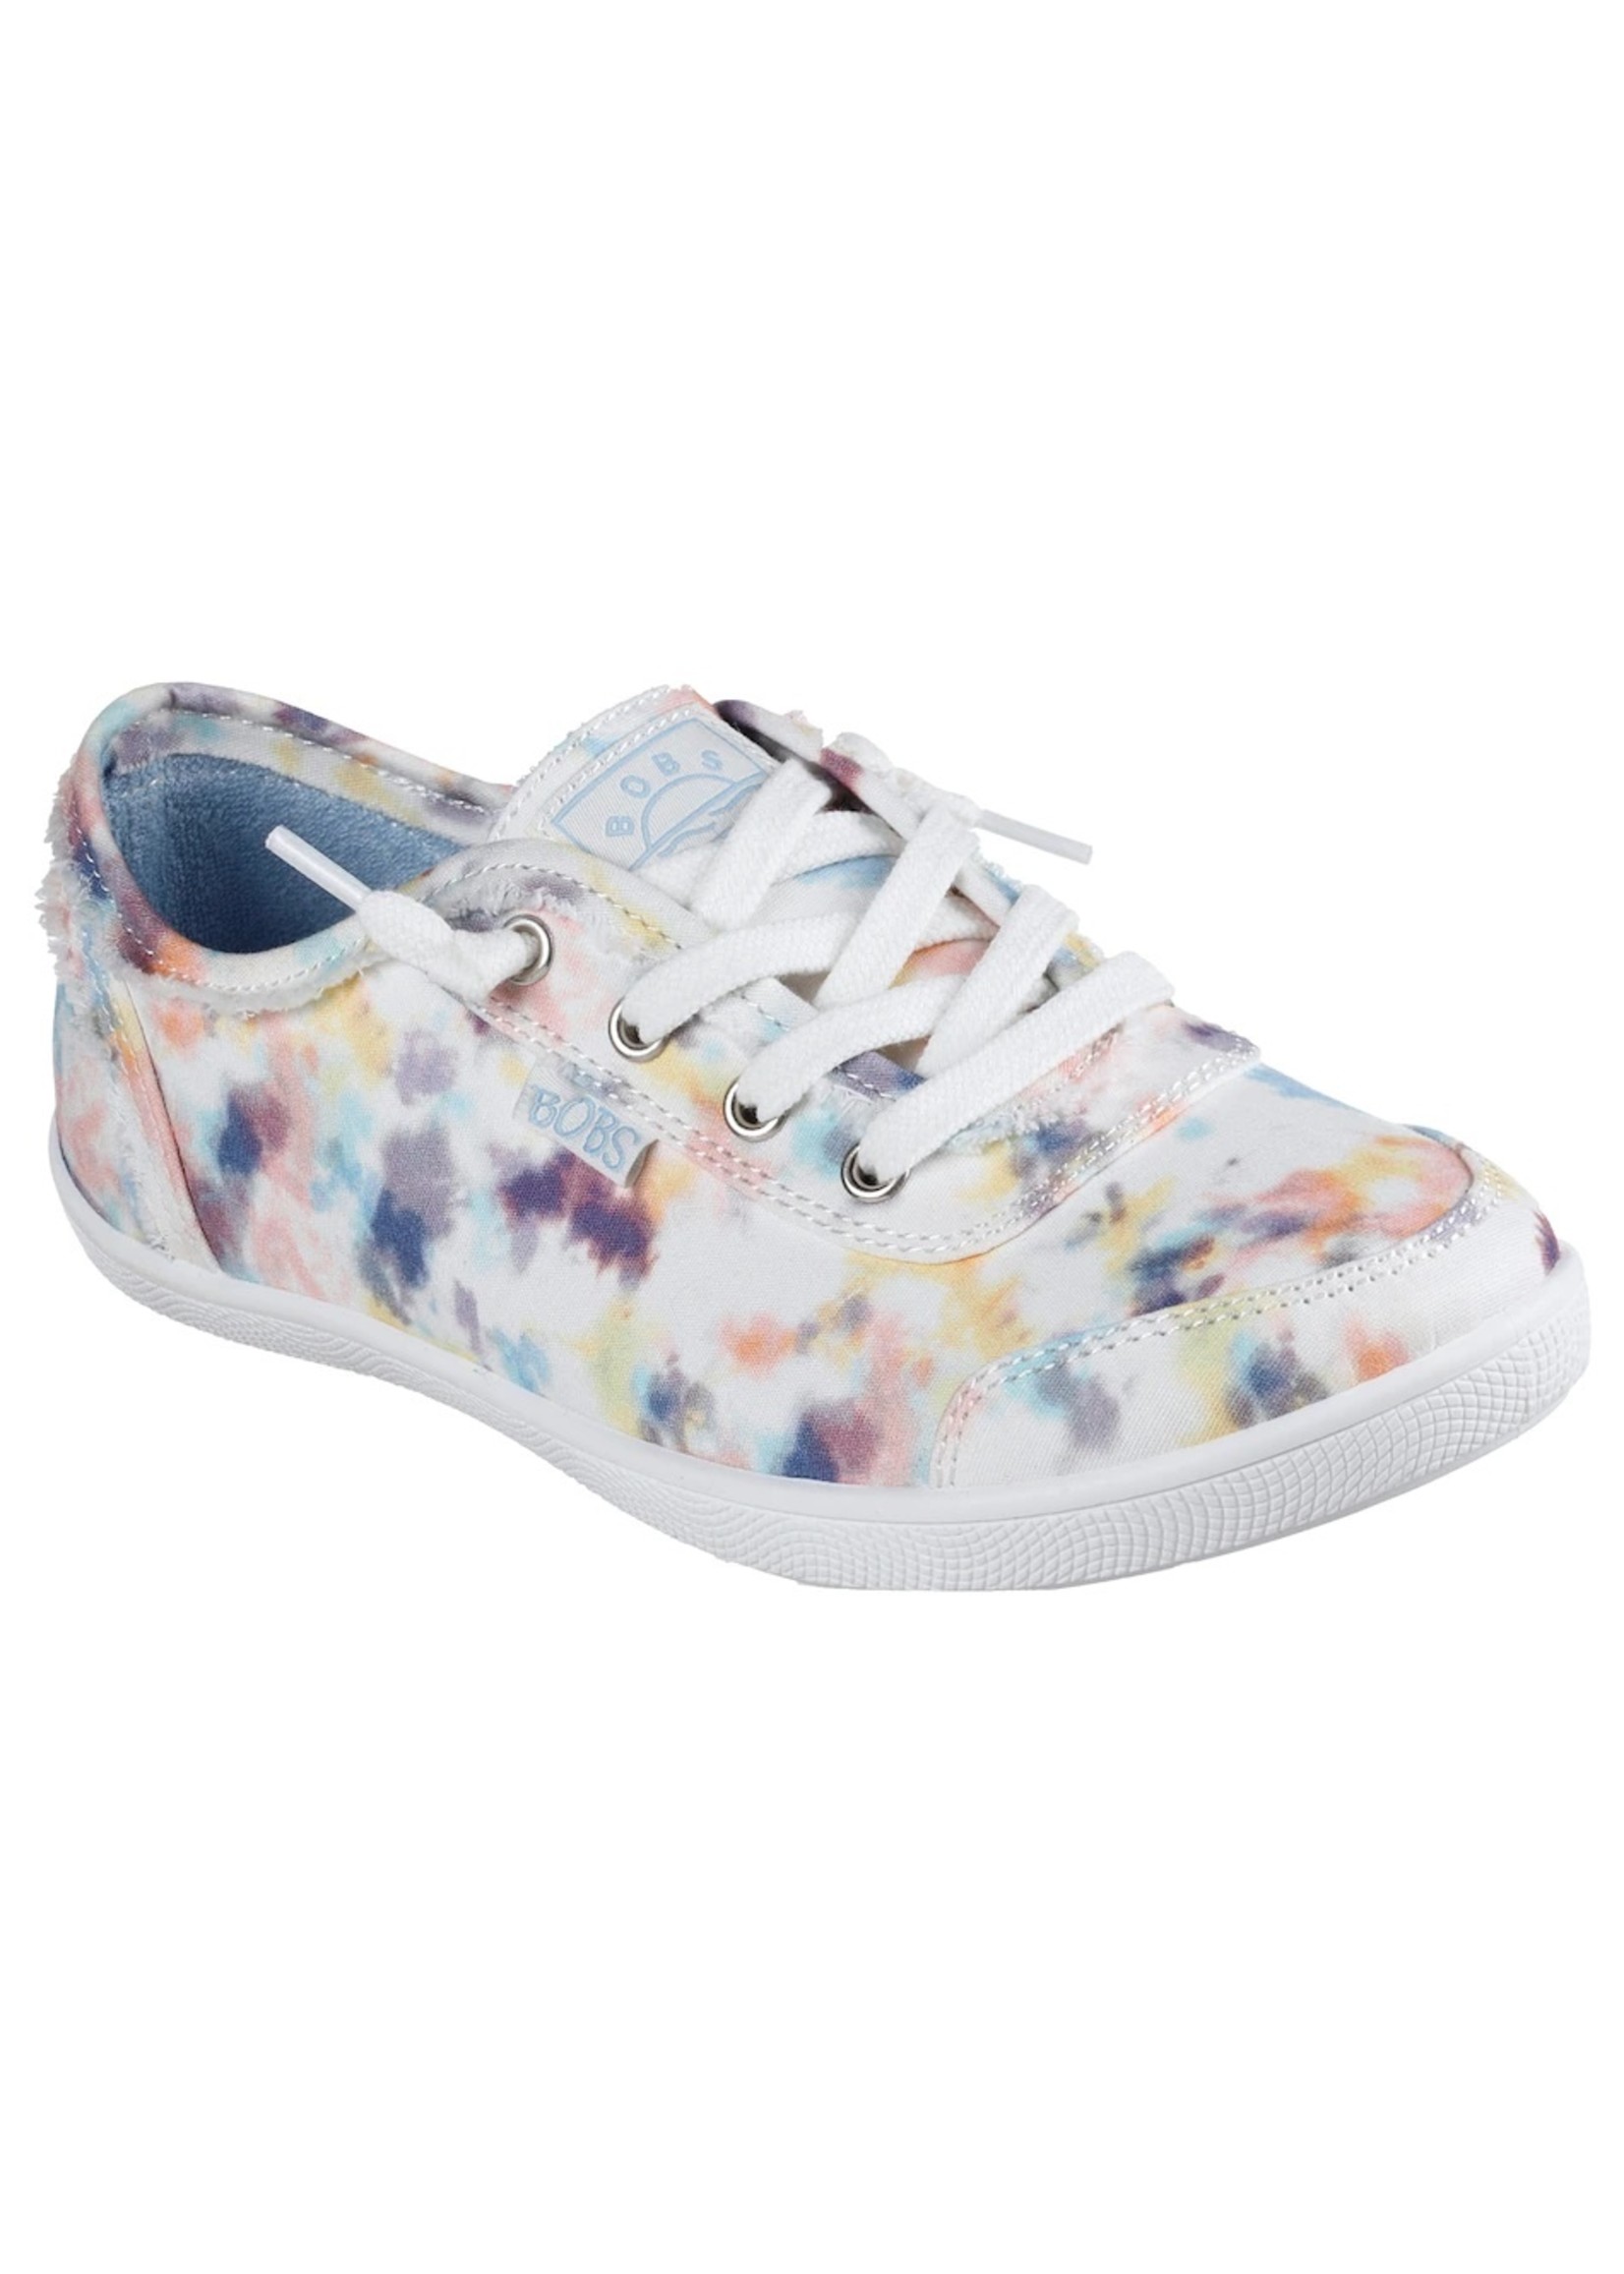 sketchers Bobs Lace Up Sneaker